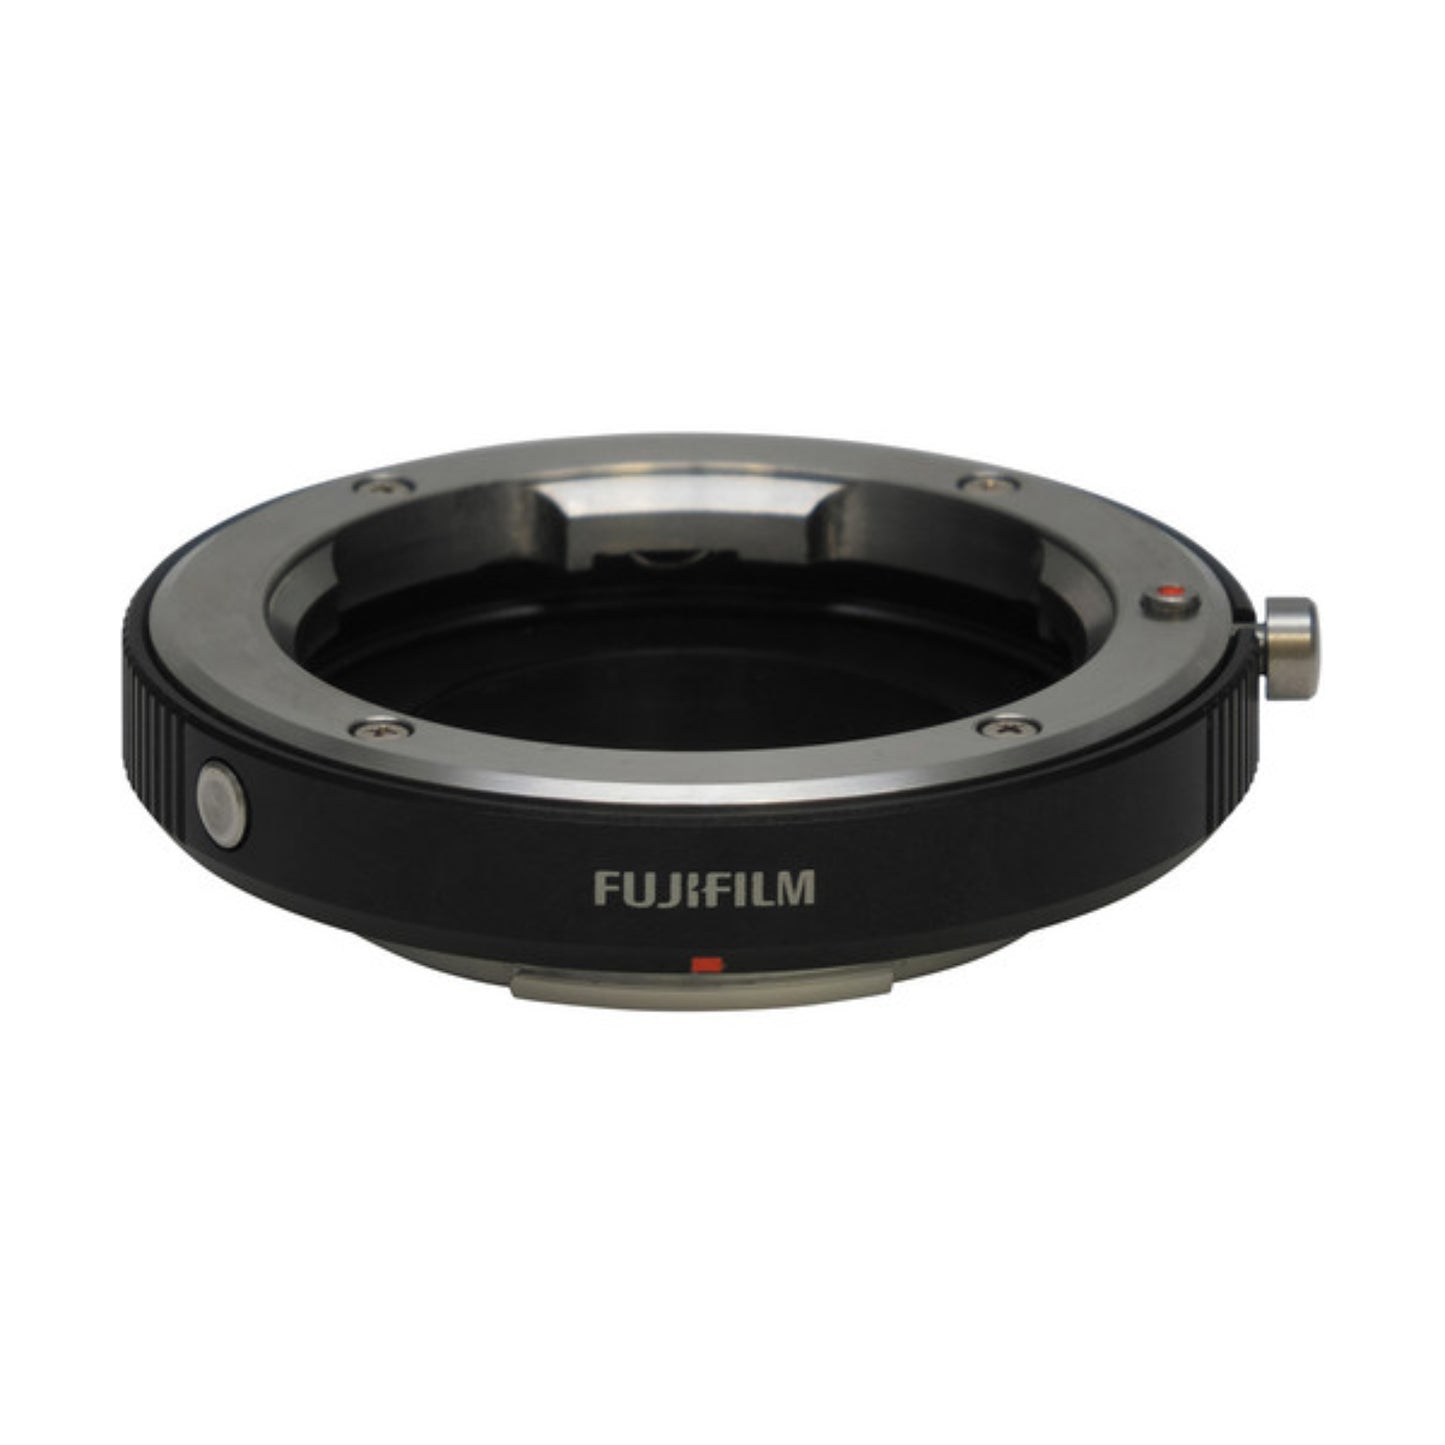 Fuji Film M mount adapter for hire